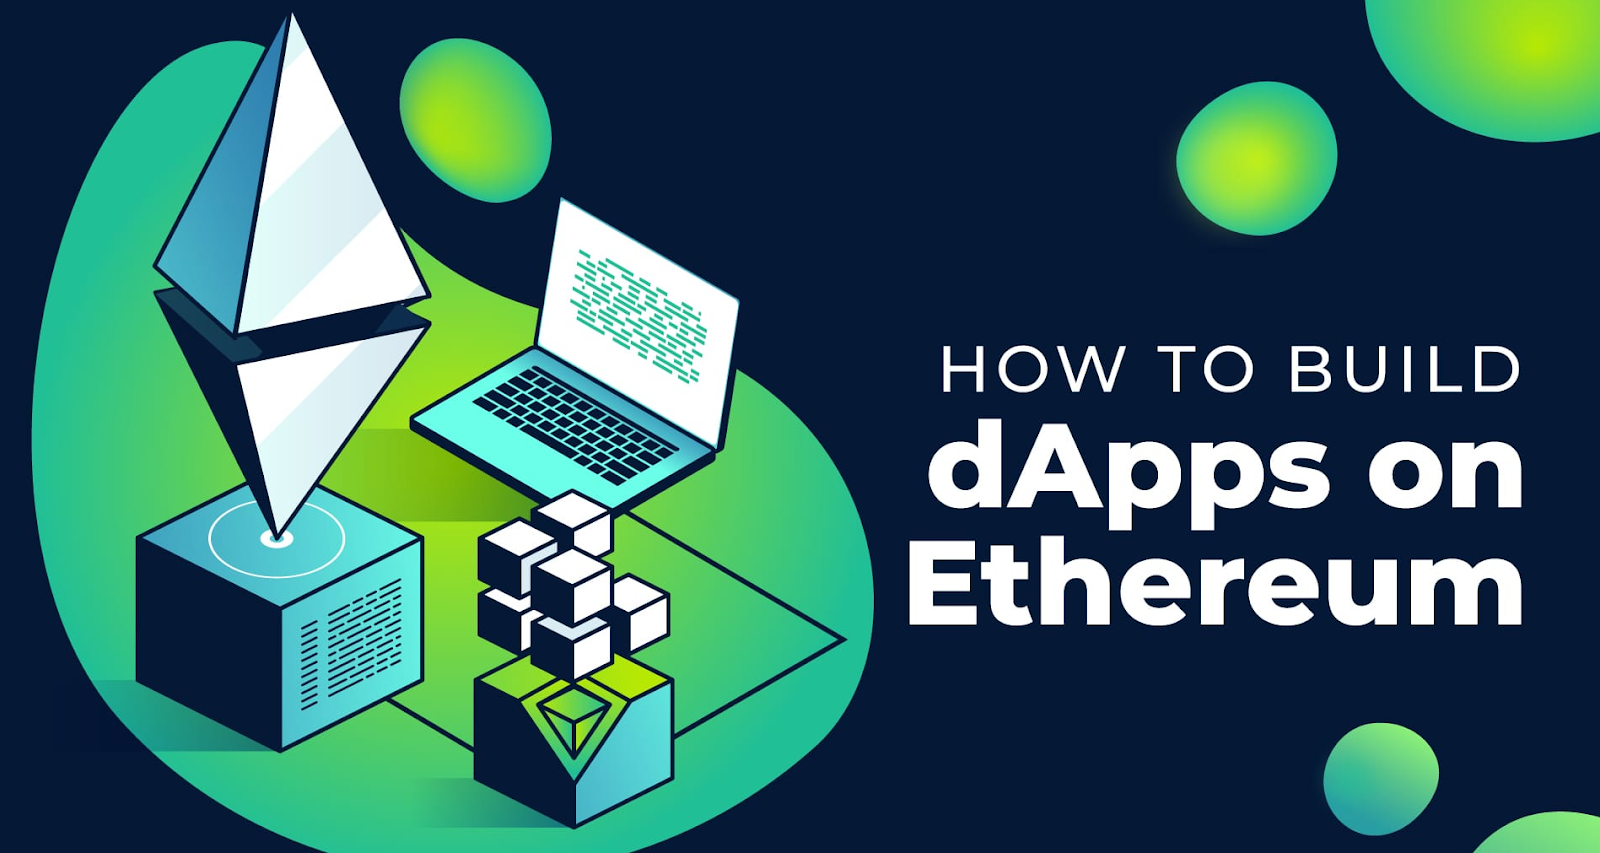 How to build dapps on Ethereum.